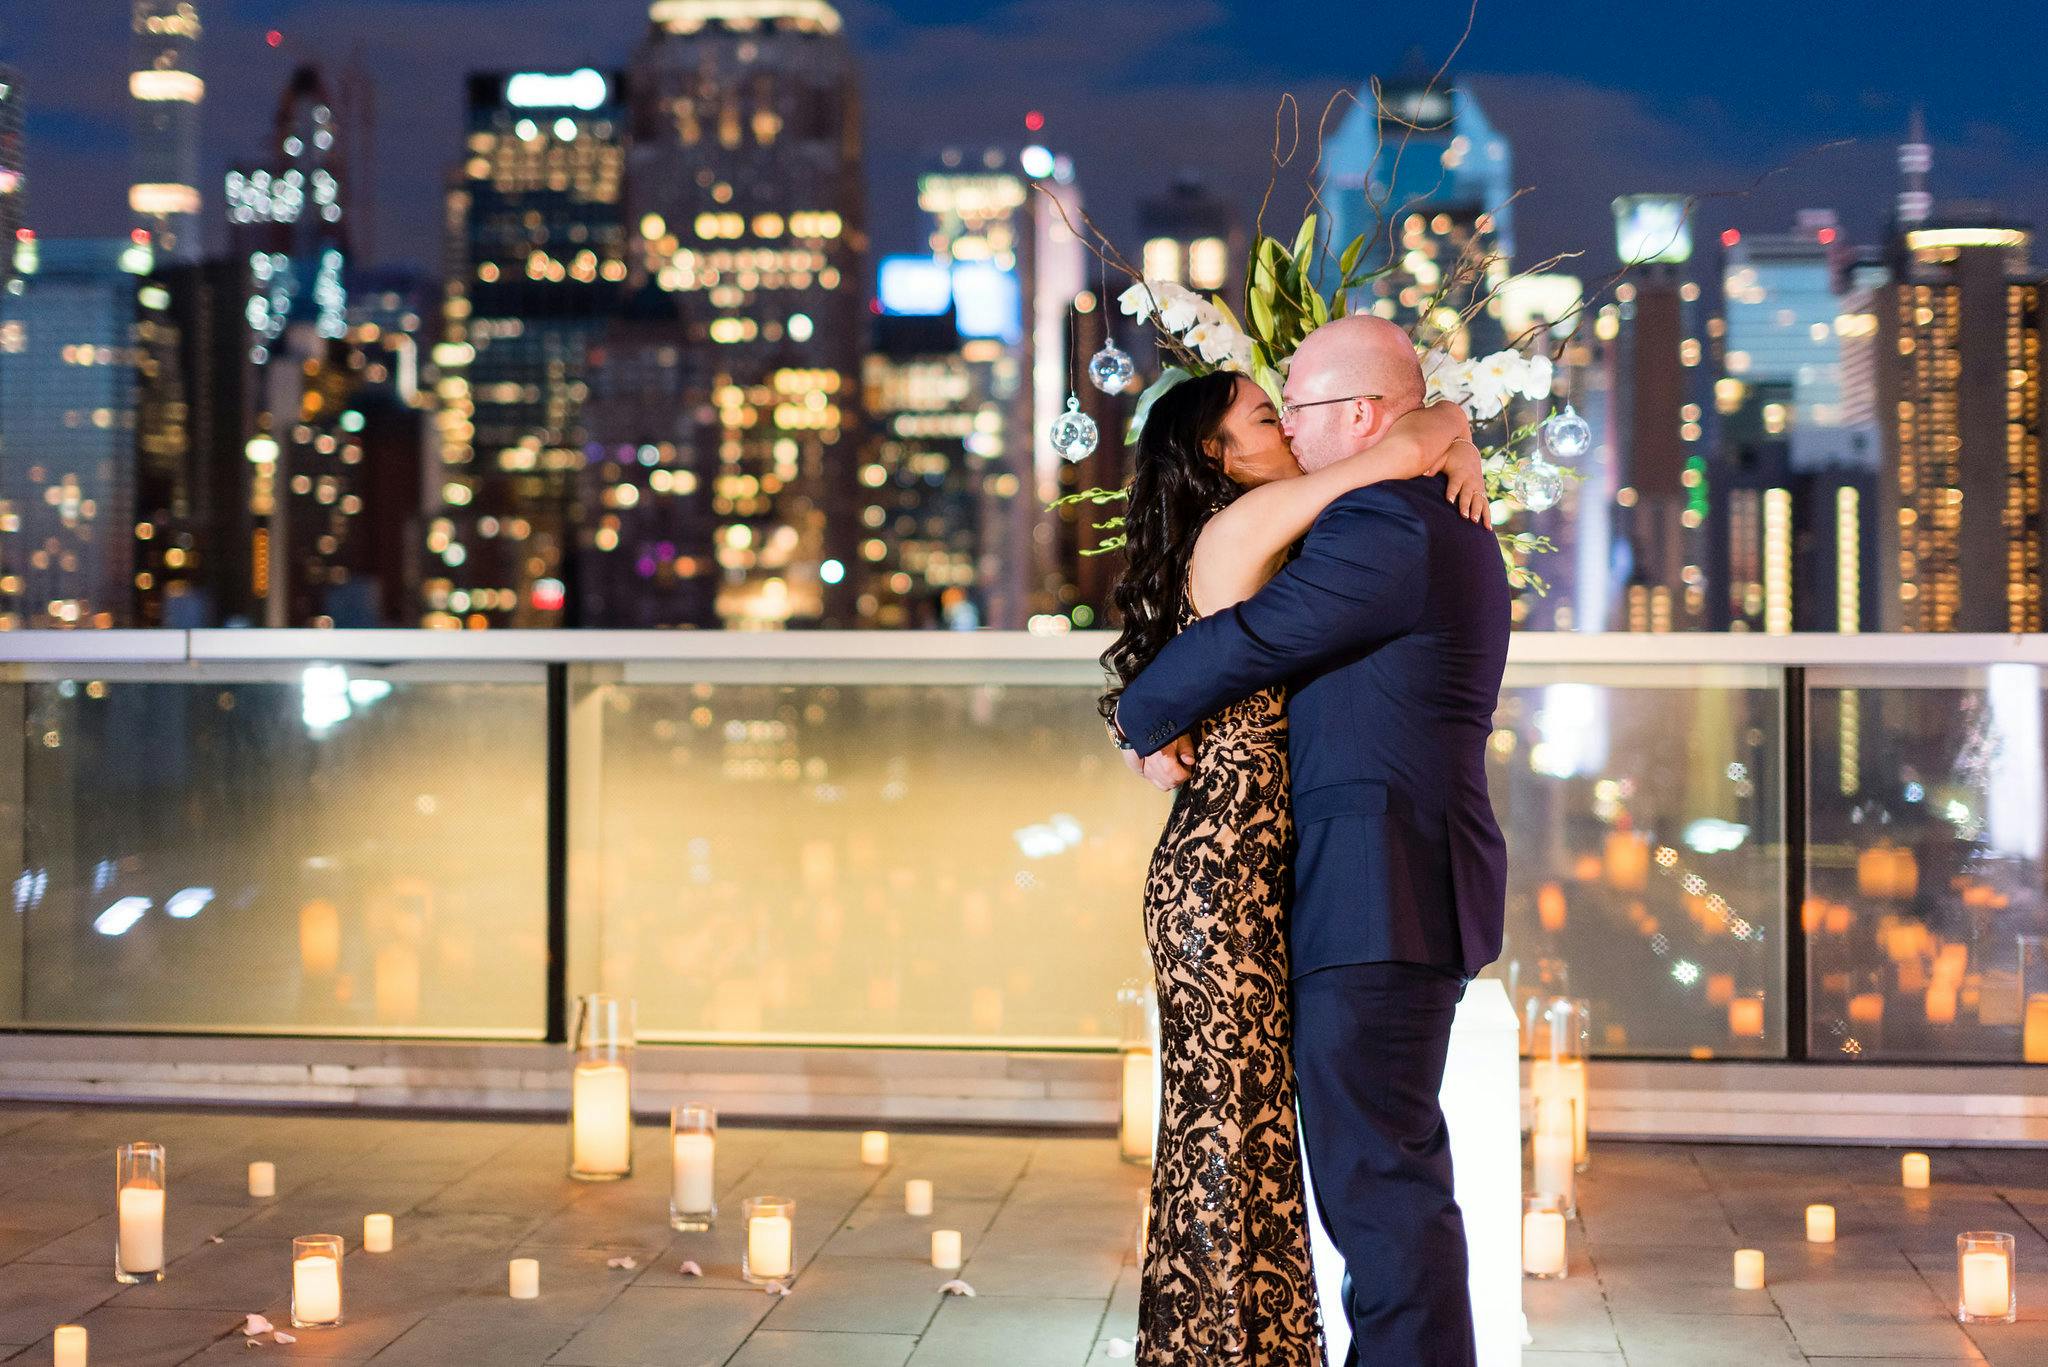 NYC Rooftop Proposal March 24,2018